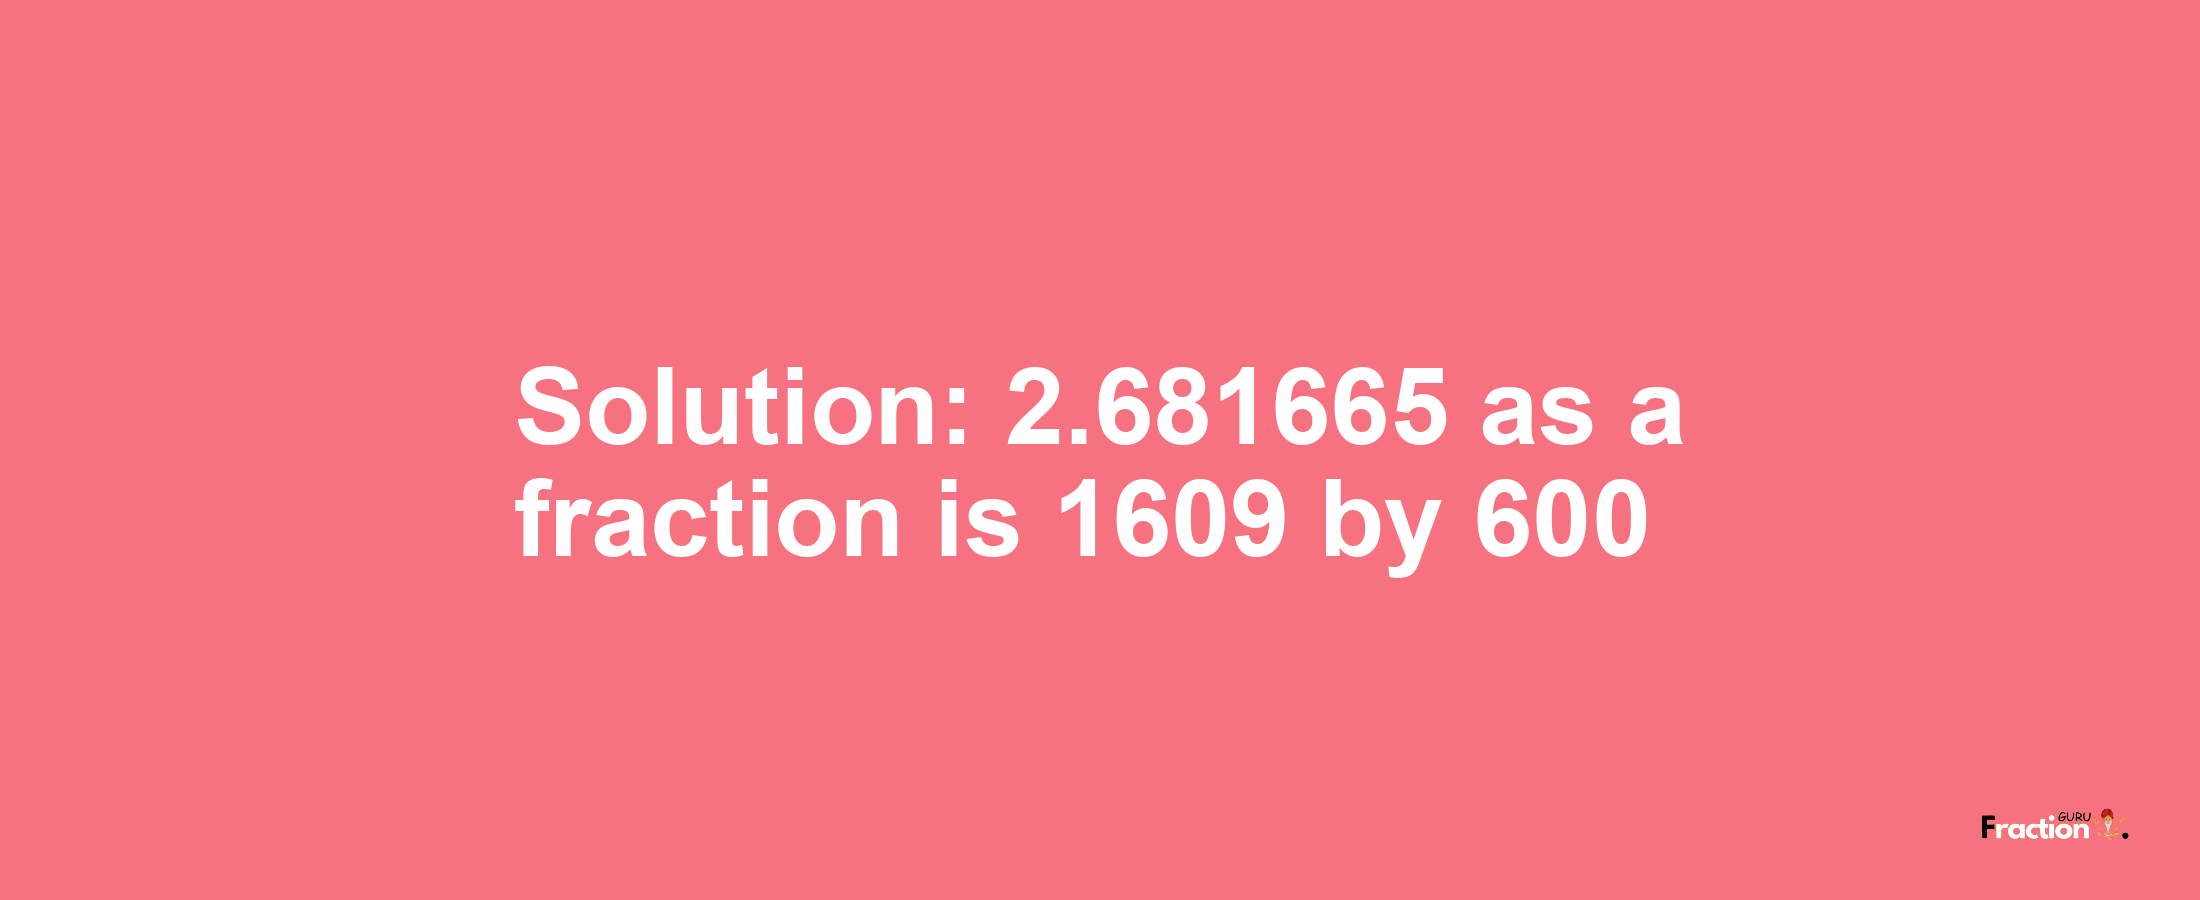 Solution:2.681665 as a fraction is 1609/600